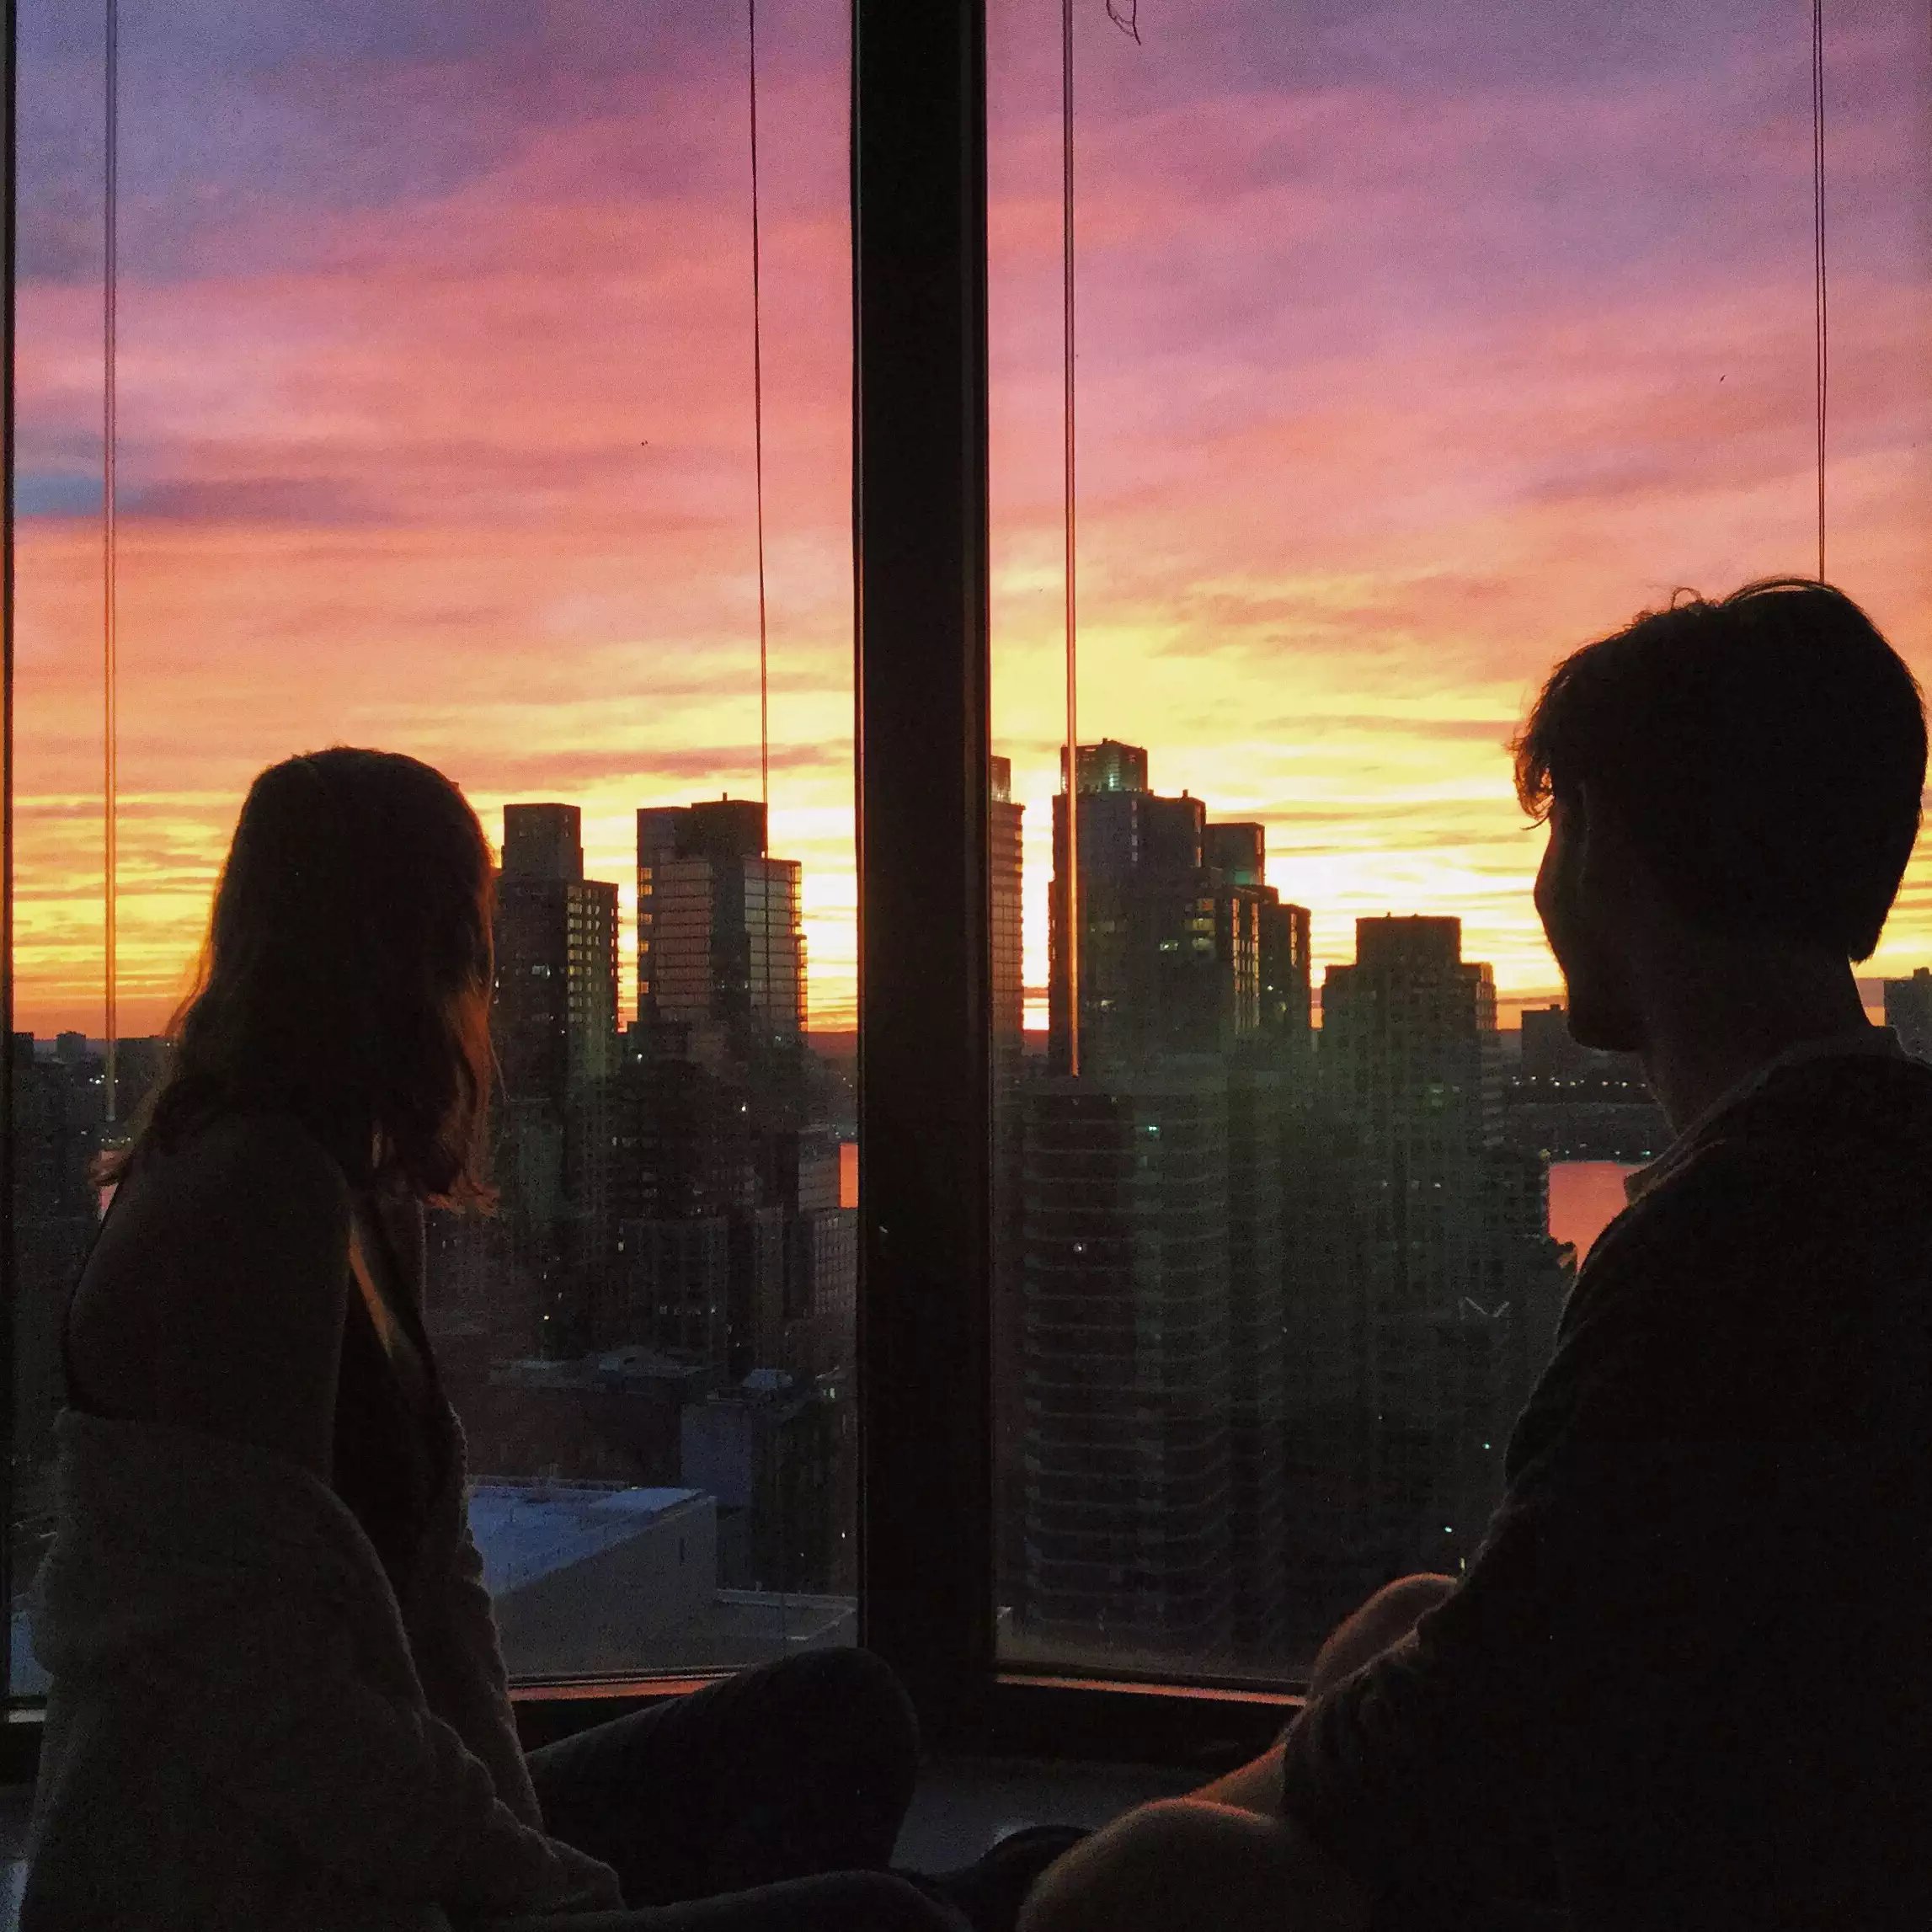 Two people sit by a window overlooking the skyline at sunset